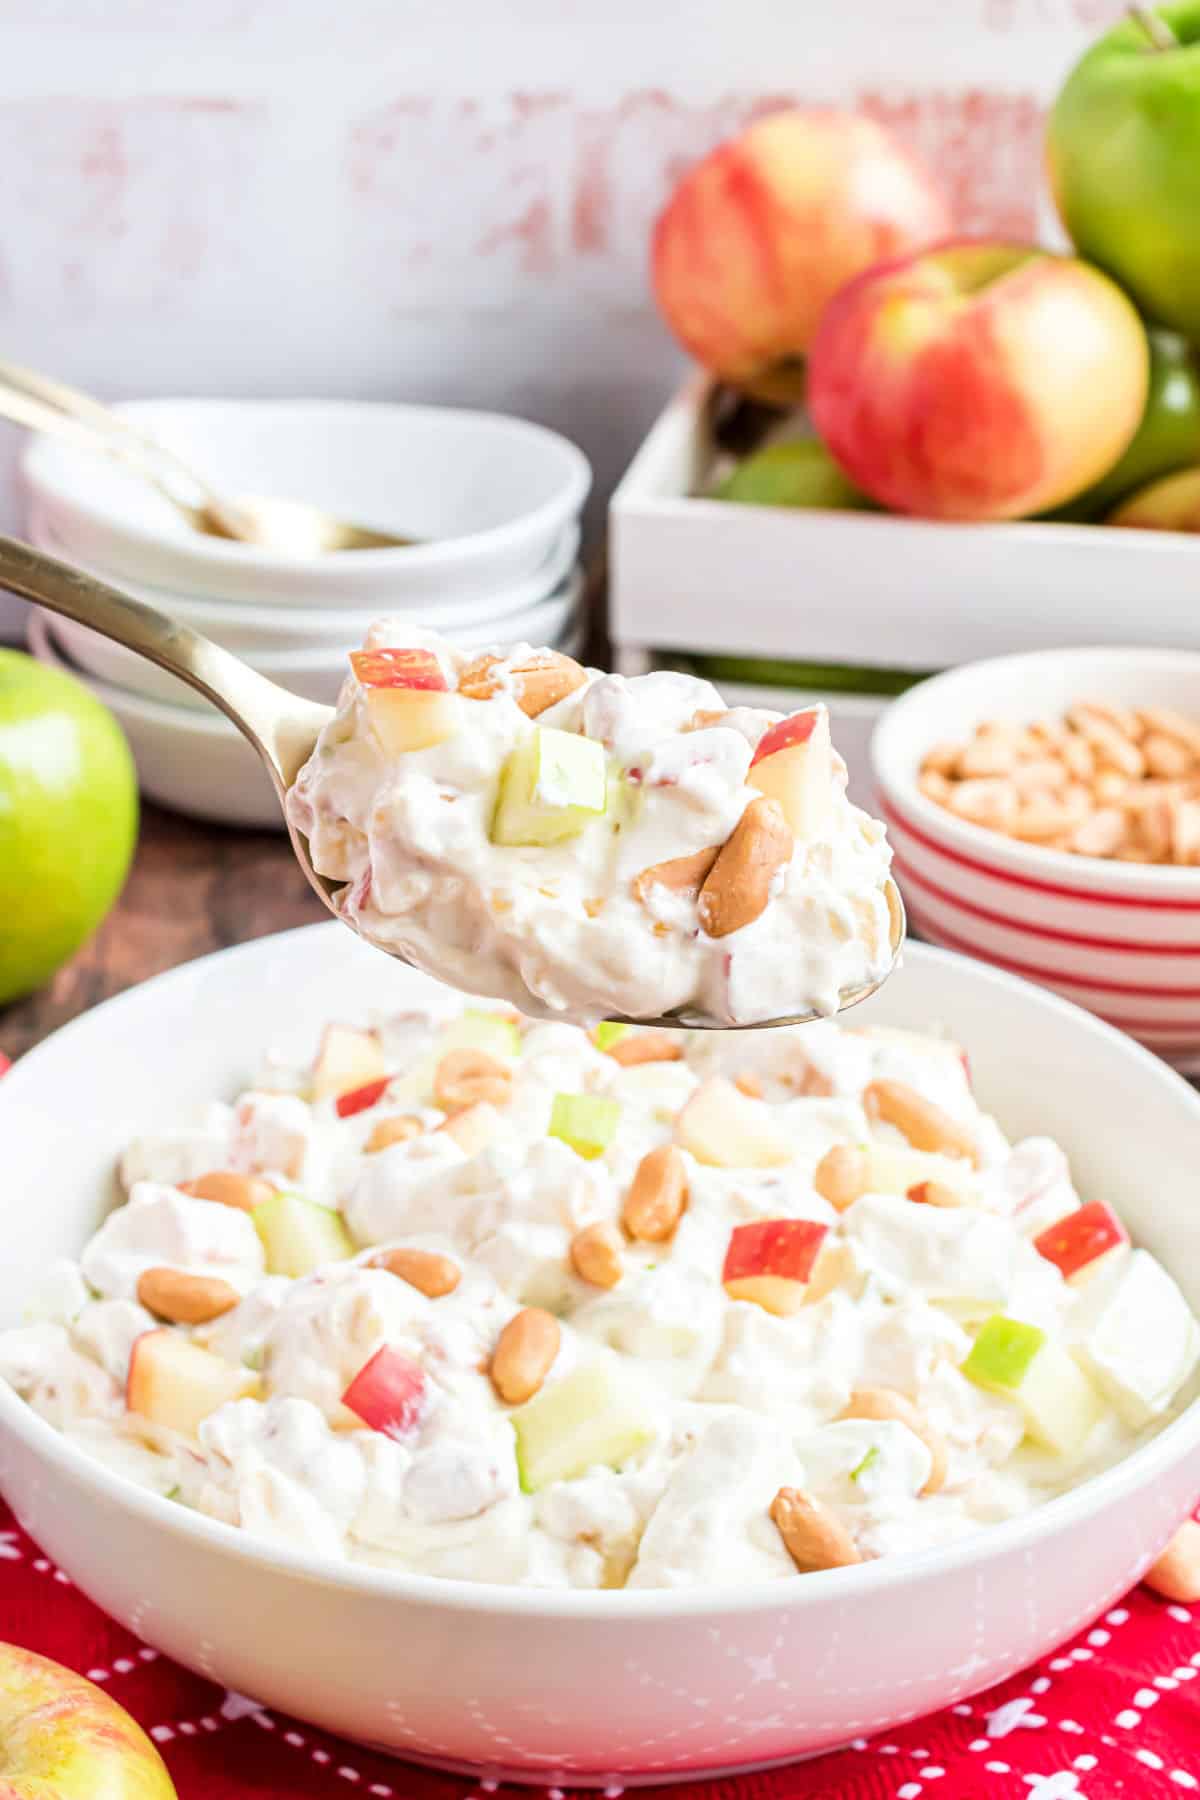 Taffy apple salad in a bowl with a serving spoon.